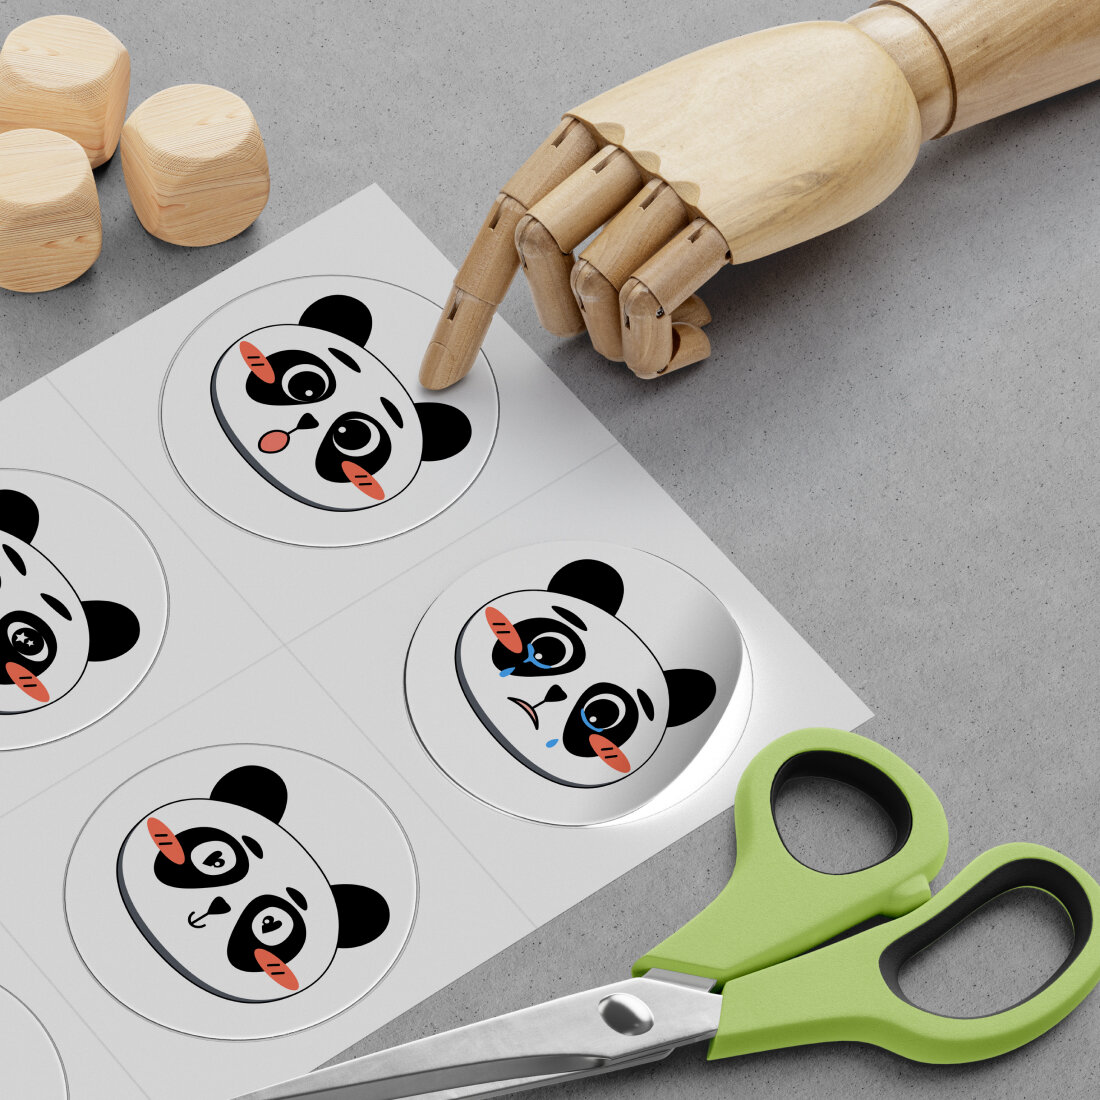 Panda Face Stickers preview image.